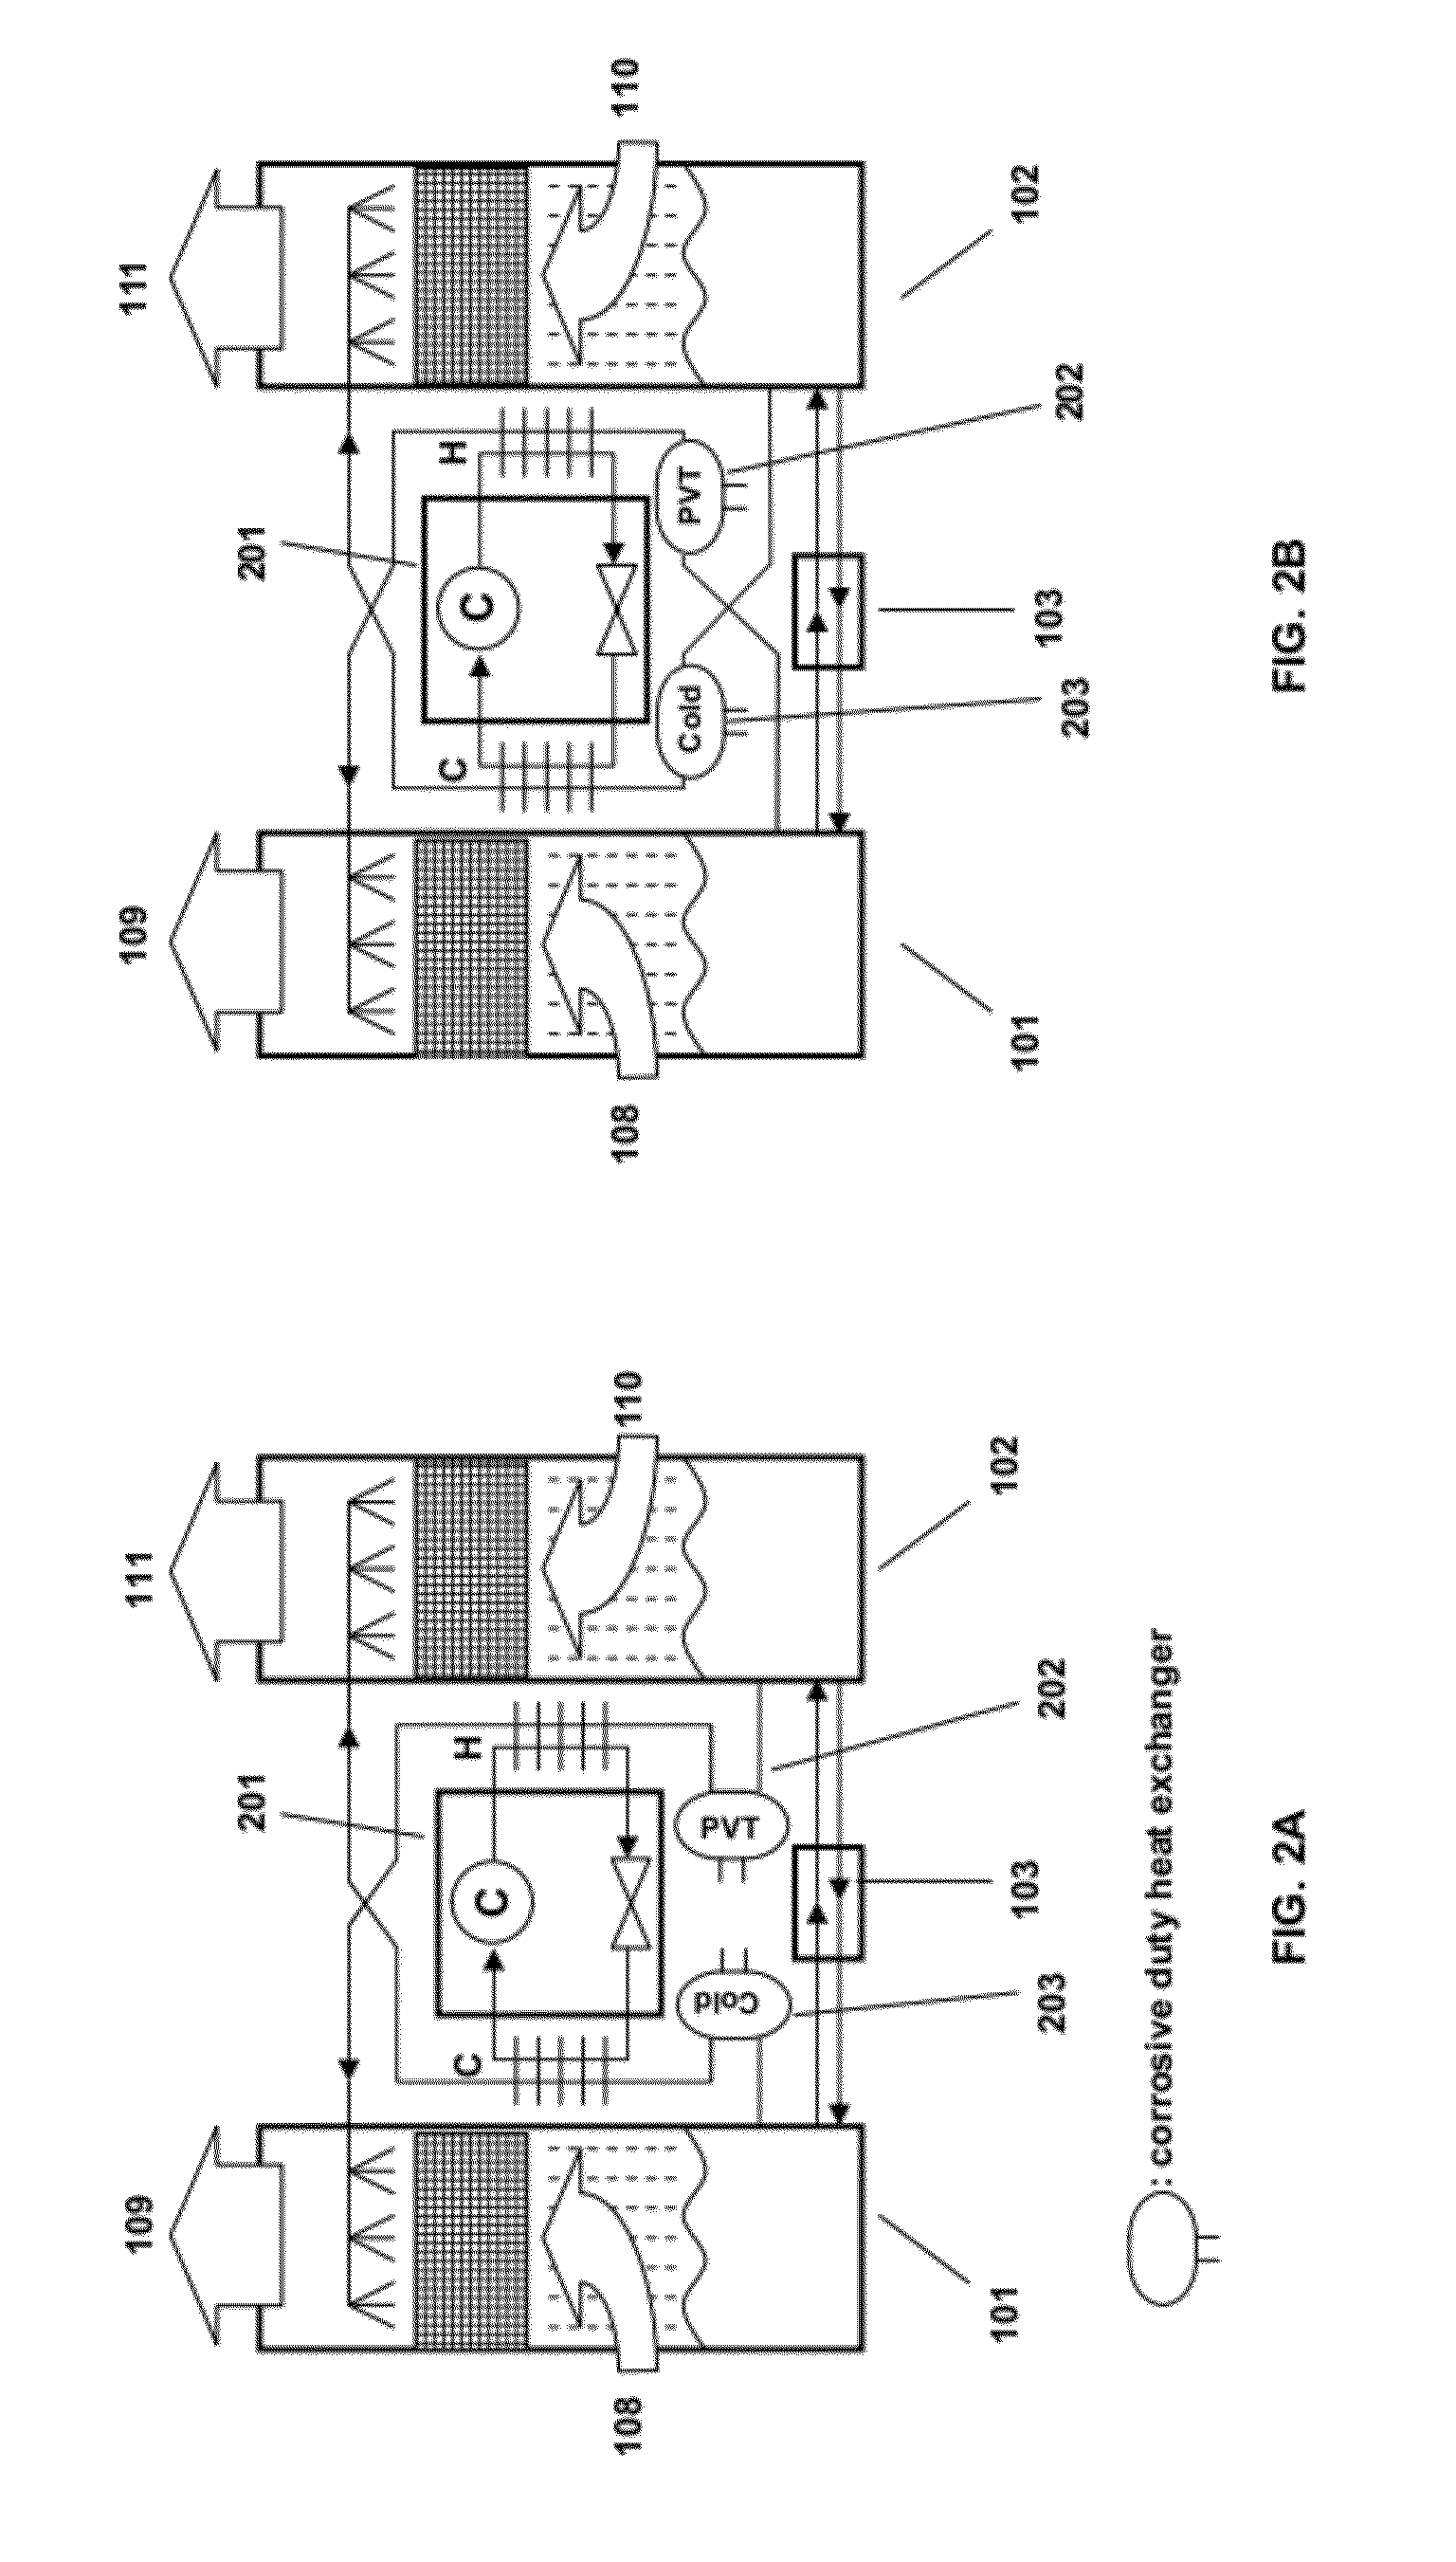 Methods and systems for desiccant air conditioning with combustion contaminant filtering